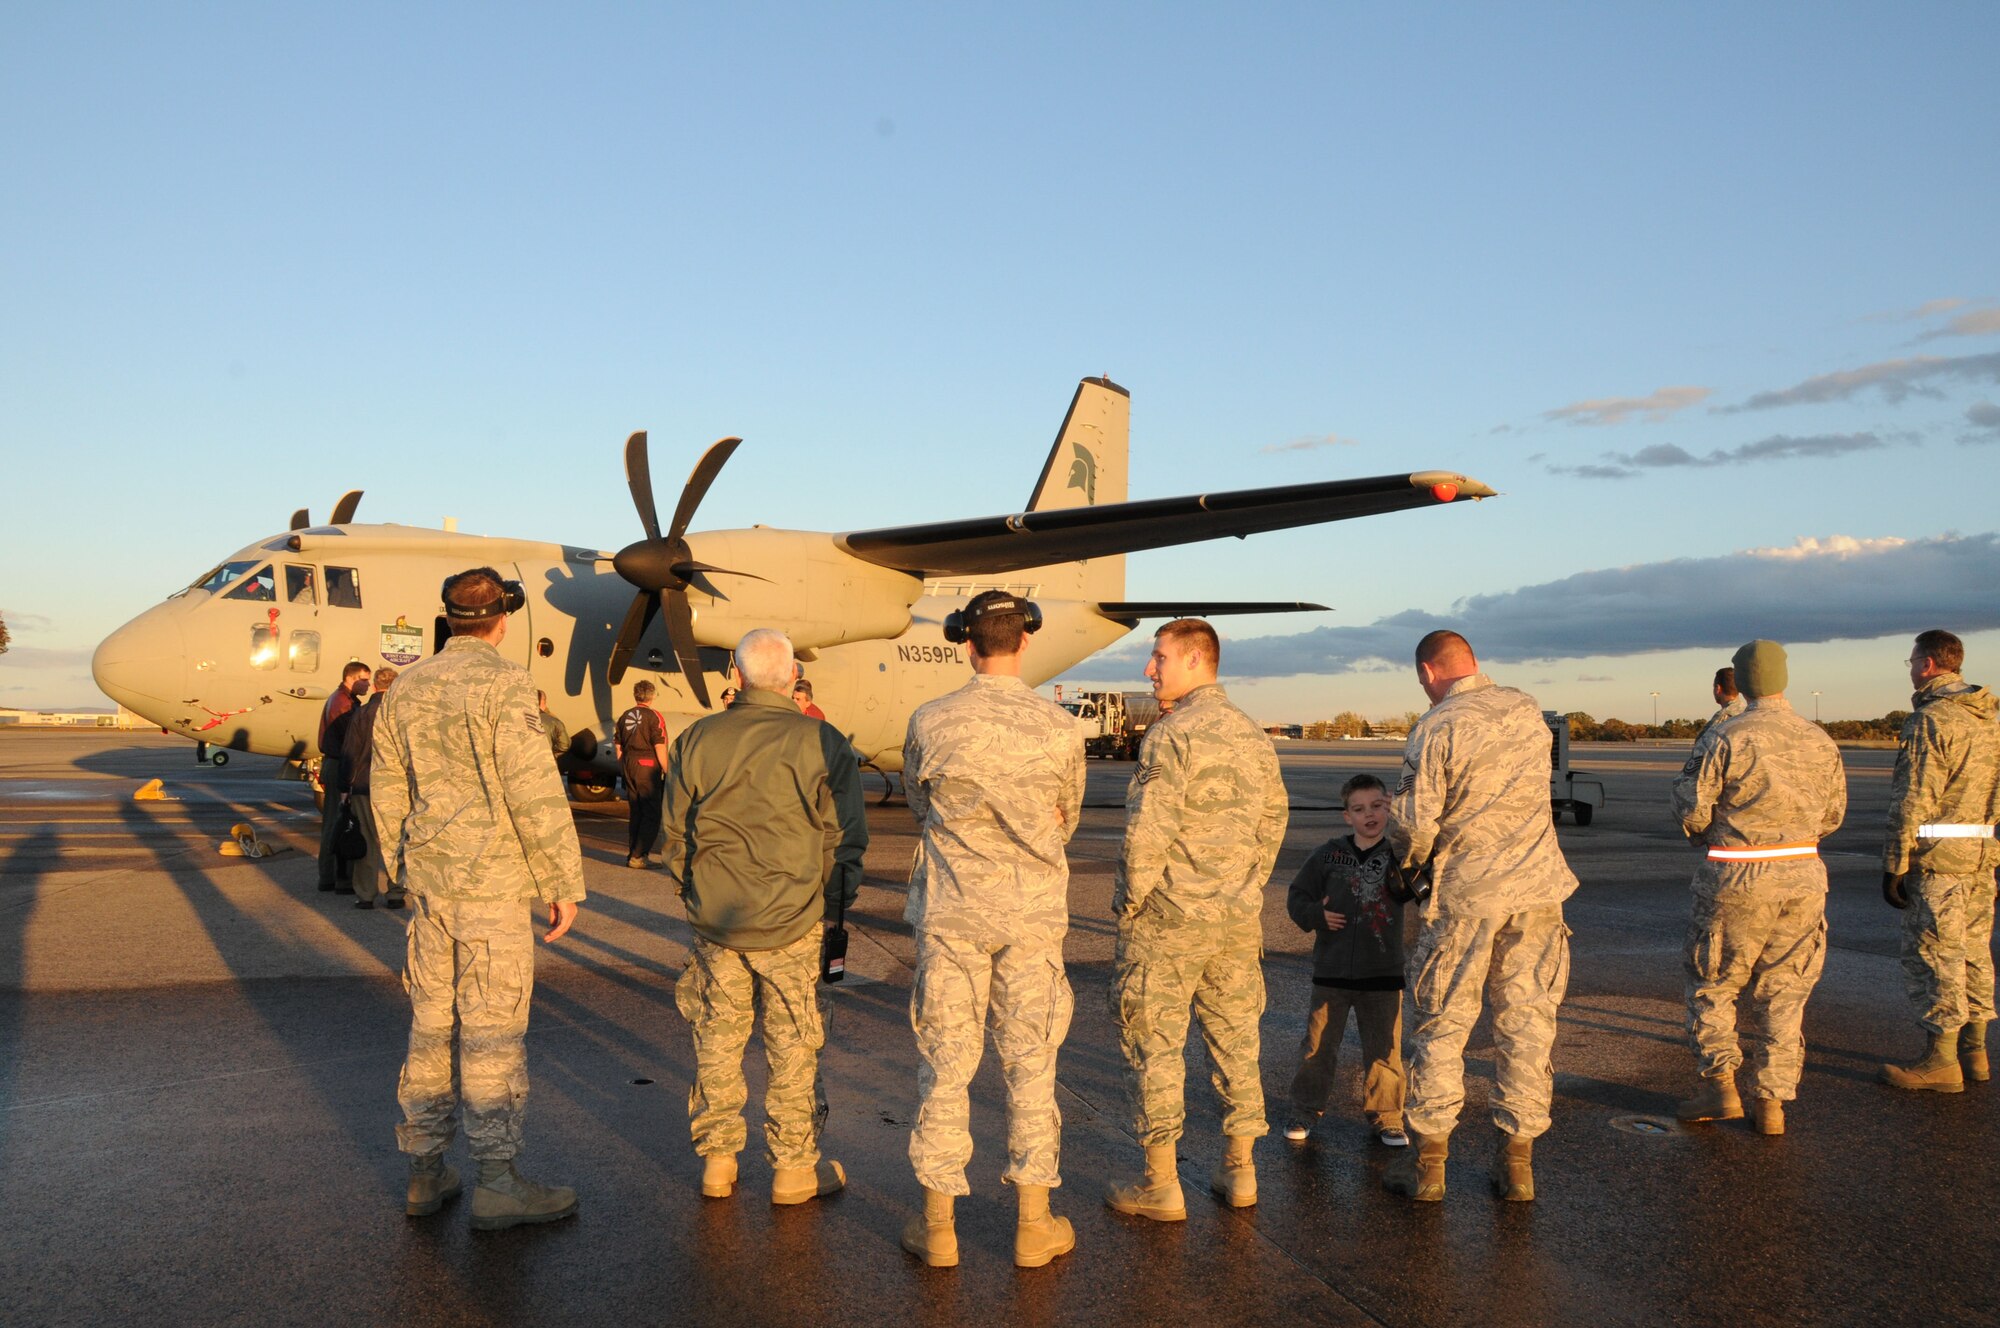 Members of the 103rd Airlift Wing observe the new C27J Spartan upon its arrival to the Bradley Air National Guard Base in East Granby, Conn. on Thursday, Oct. 21, 2010.  The aircraft visit afforded the Flying Yankees of the 103rd Airlift Wing an opportunity to experience its future mission capabilities first hand.  (U.S. Air Force photo by Tech. Sgt. Erin E. McNamara)